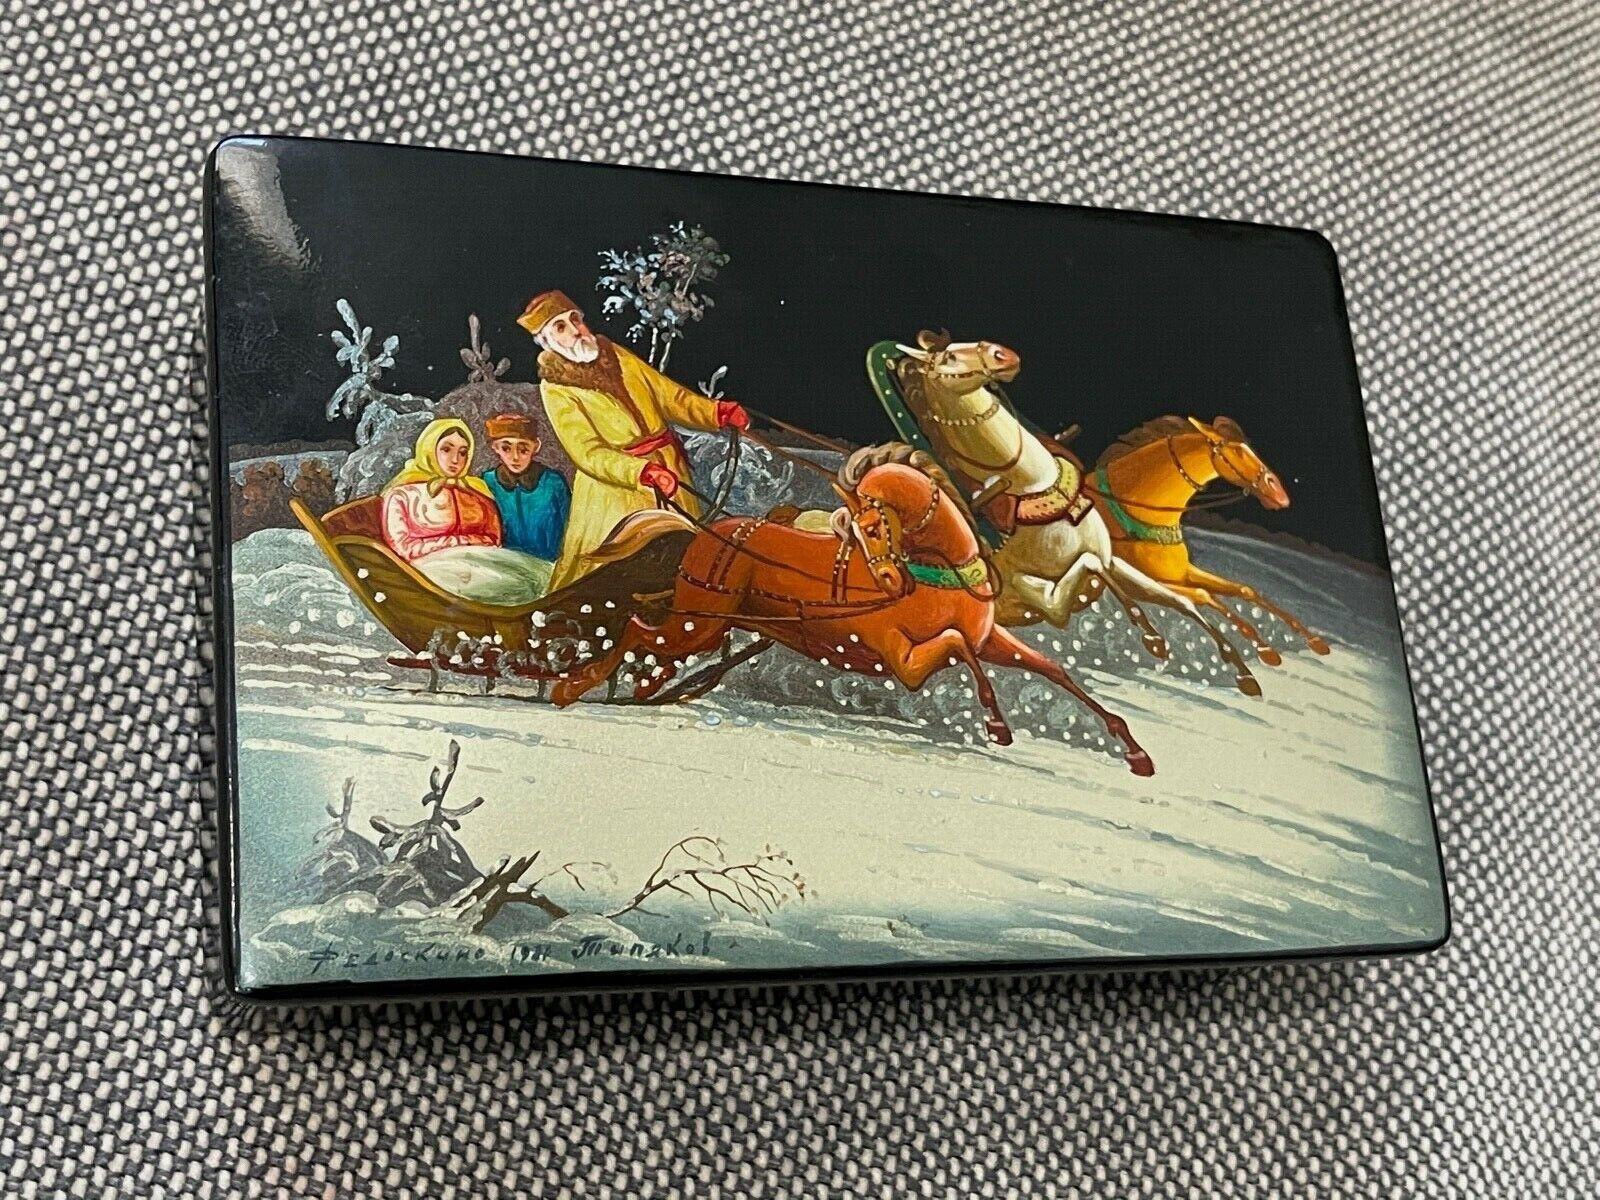 Vintage 1981 Russian Lacquer Signed Painted Box Troika Sleigh Figures Horses